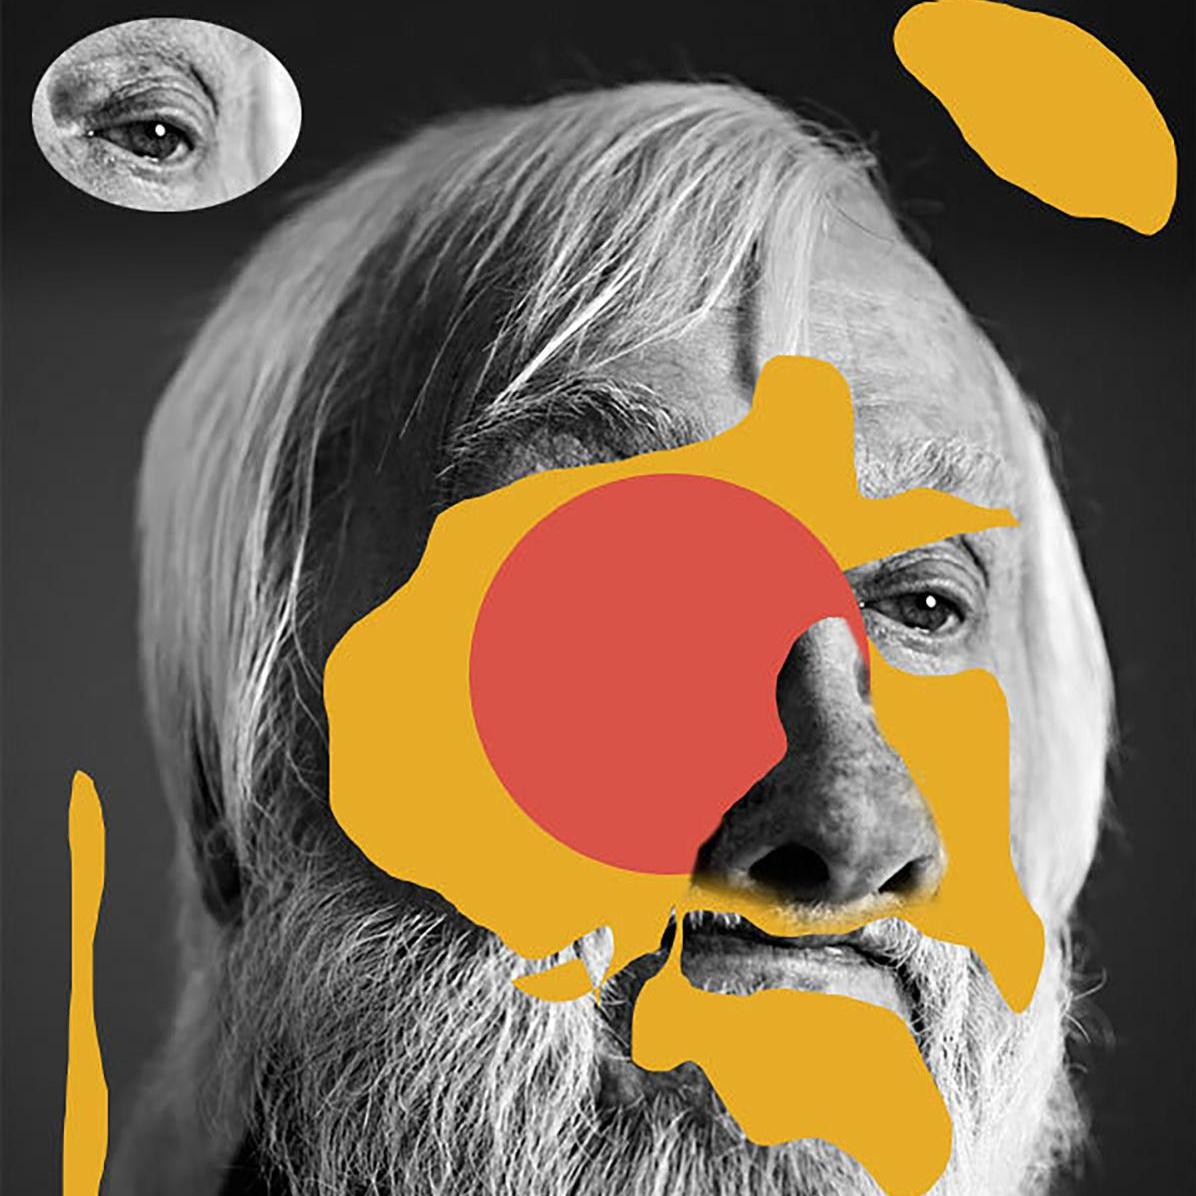 John Baldessari, a Key Figure of American Conceptualism, Has Passed Away  - Appointments & Obituaries